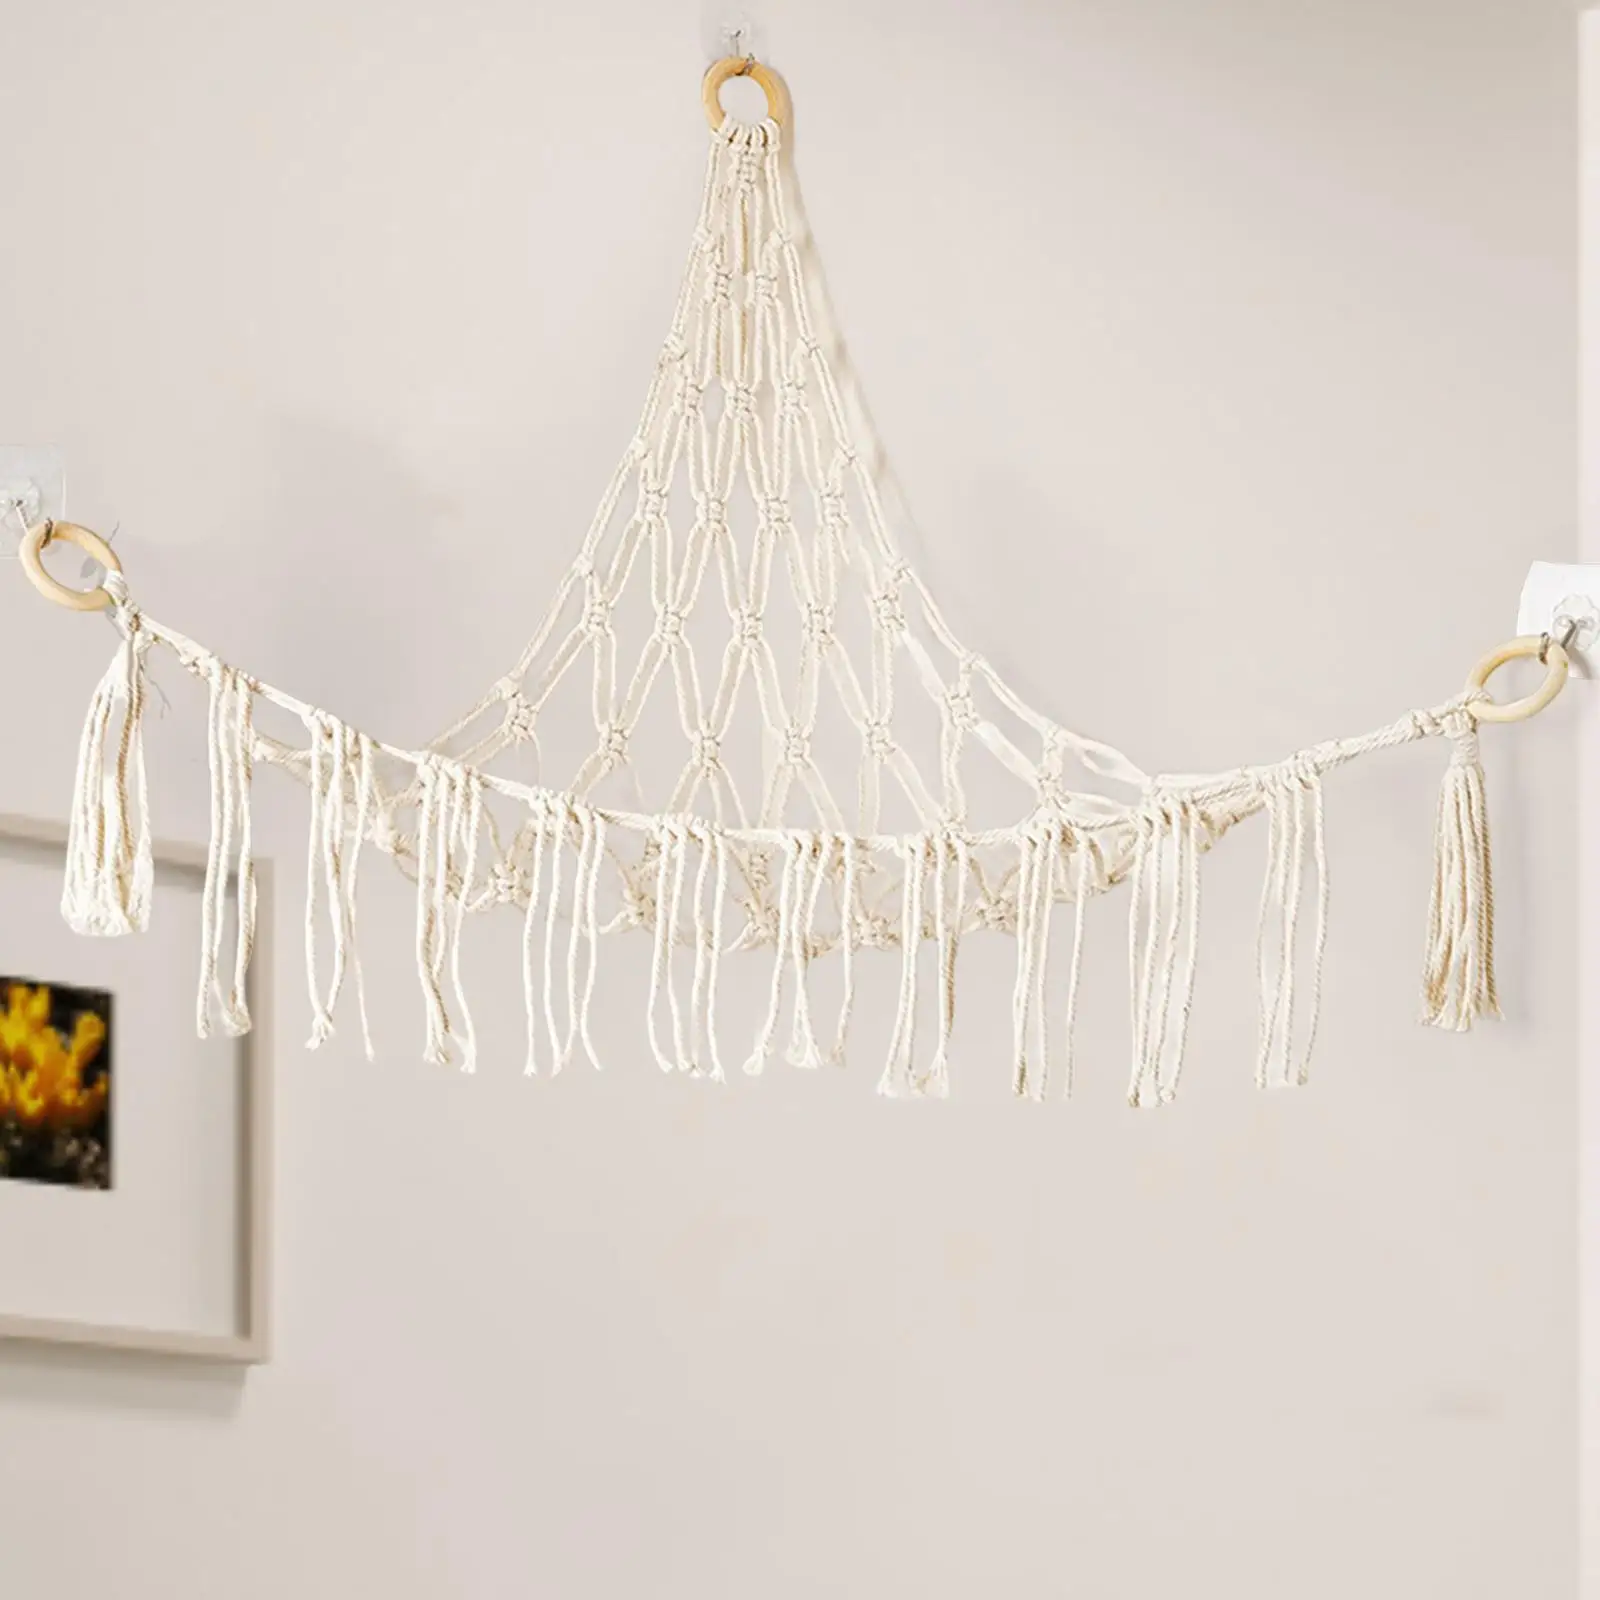 Toy Hammock with Hook Hanging Macrame Stuff for Decoration Holiday Gifts